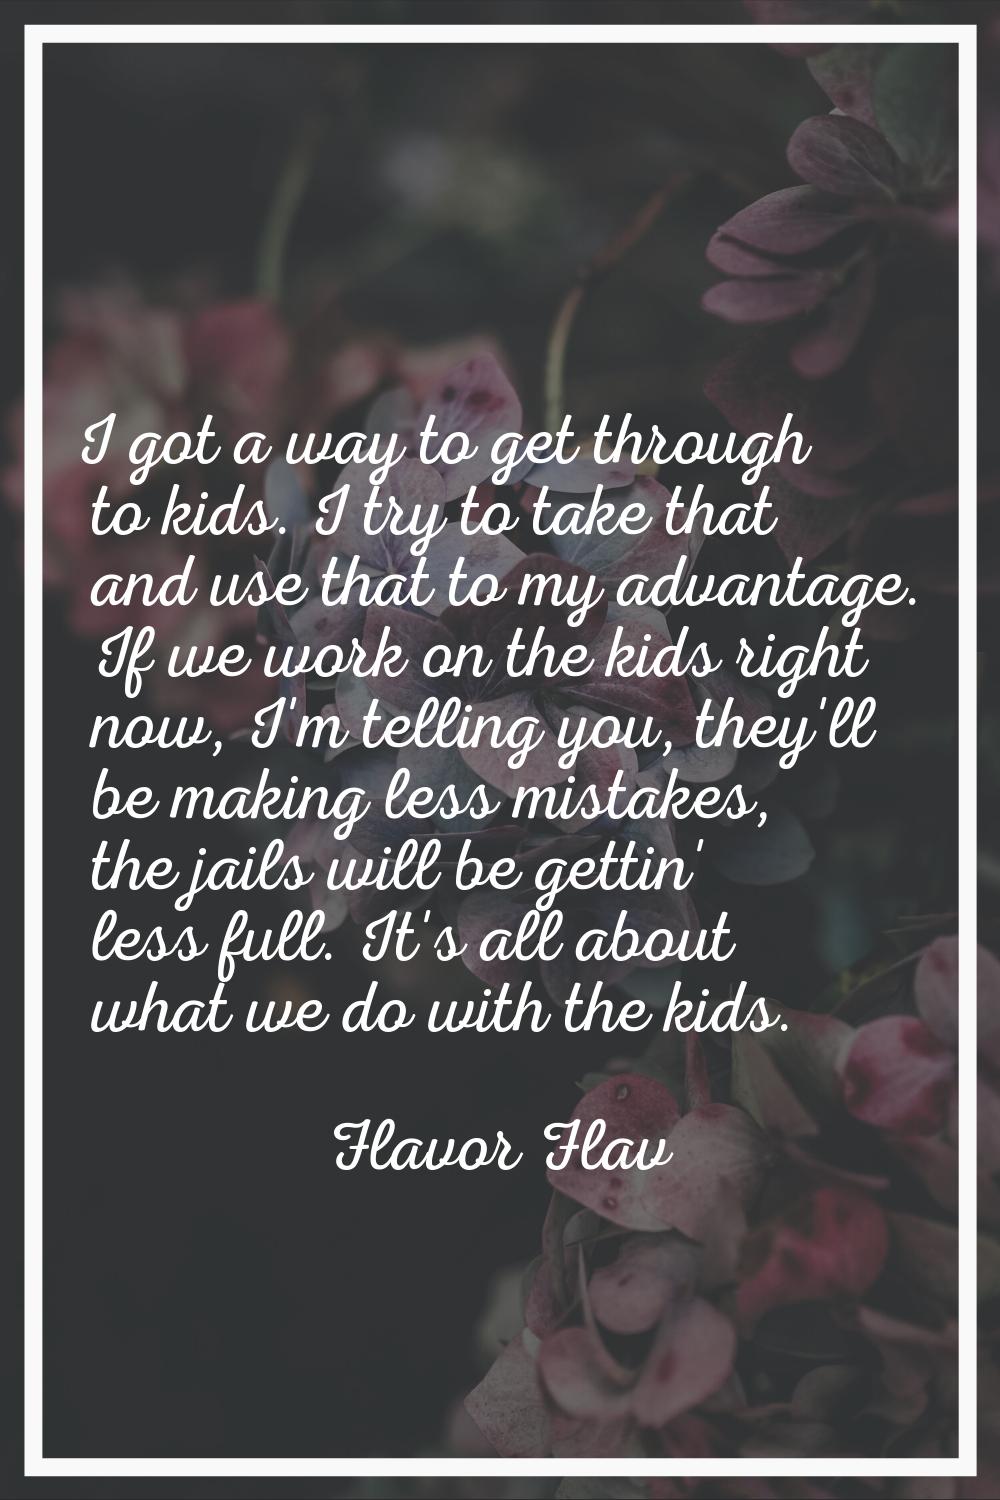 I got a way to get through to kids. I try to take that and use that to my advantage. If we work on 